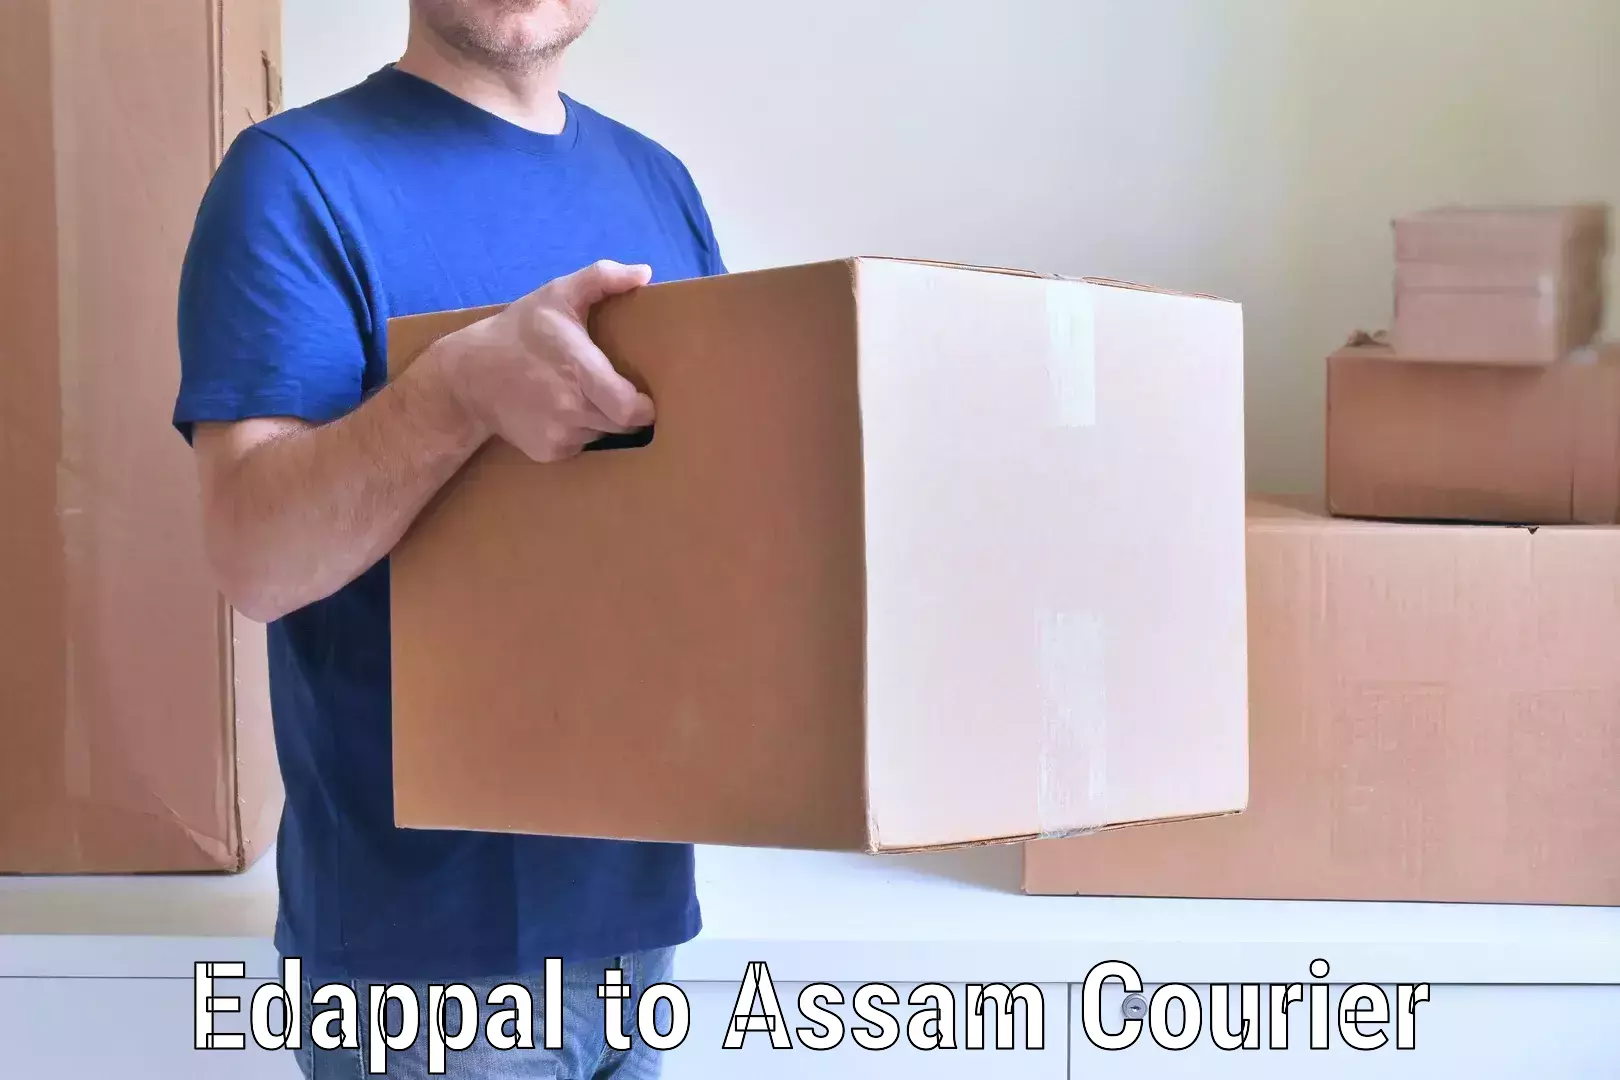 Trusted relocation experts Edappal to Lala Assam